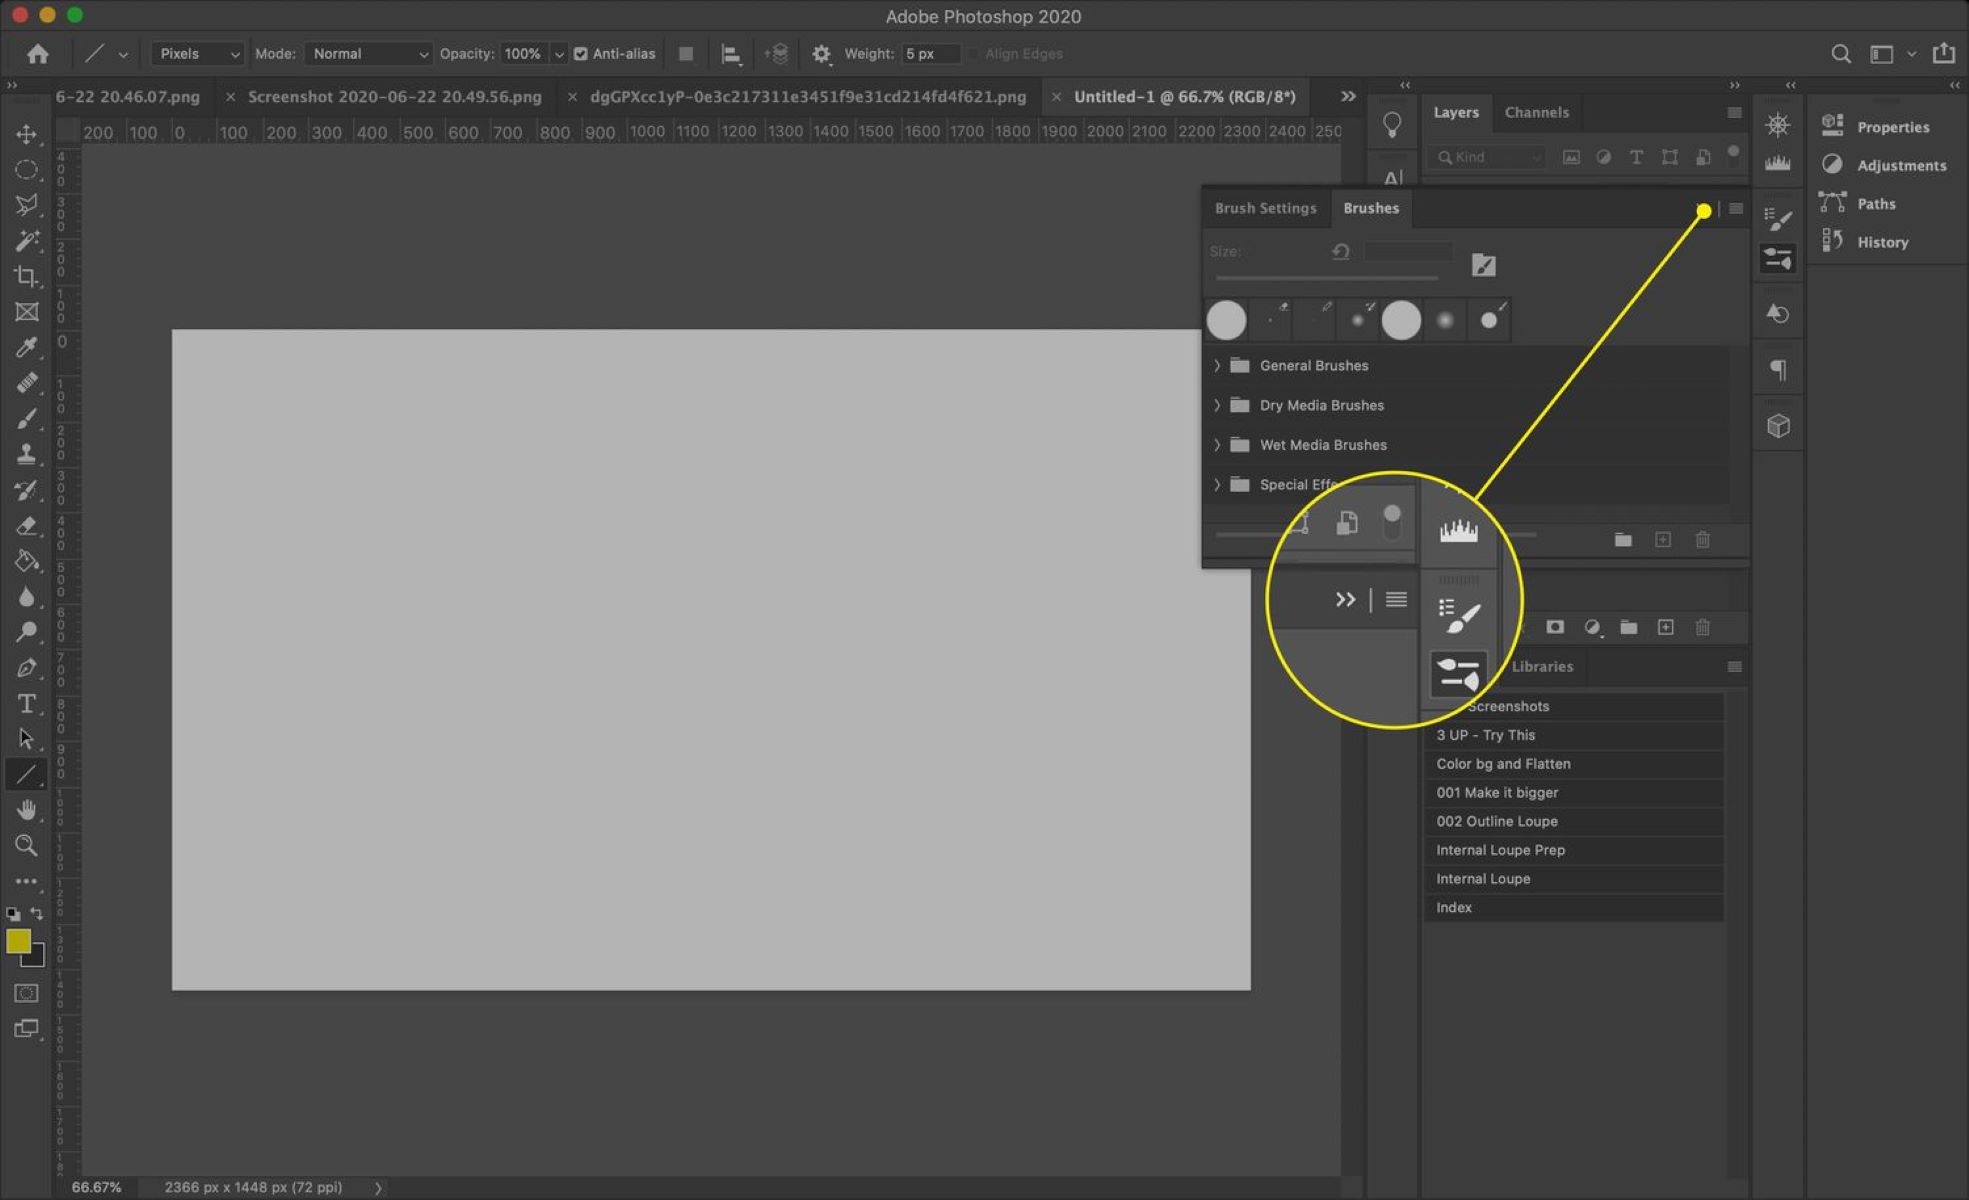 How To Install Brushes In Adobe Photoshop